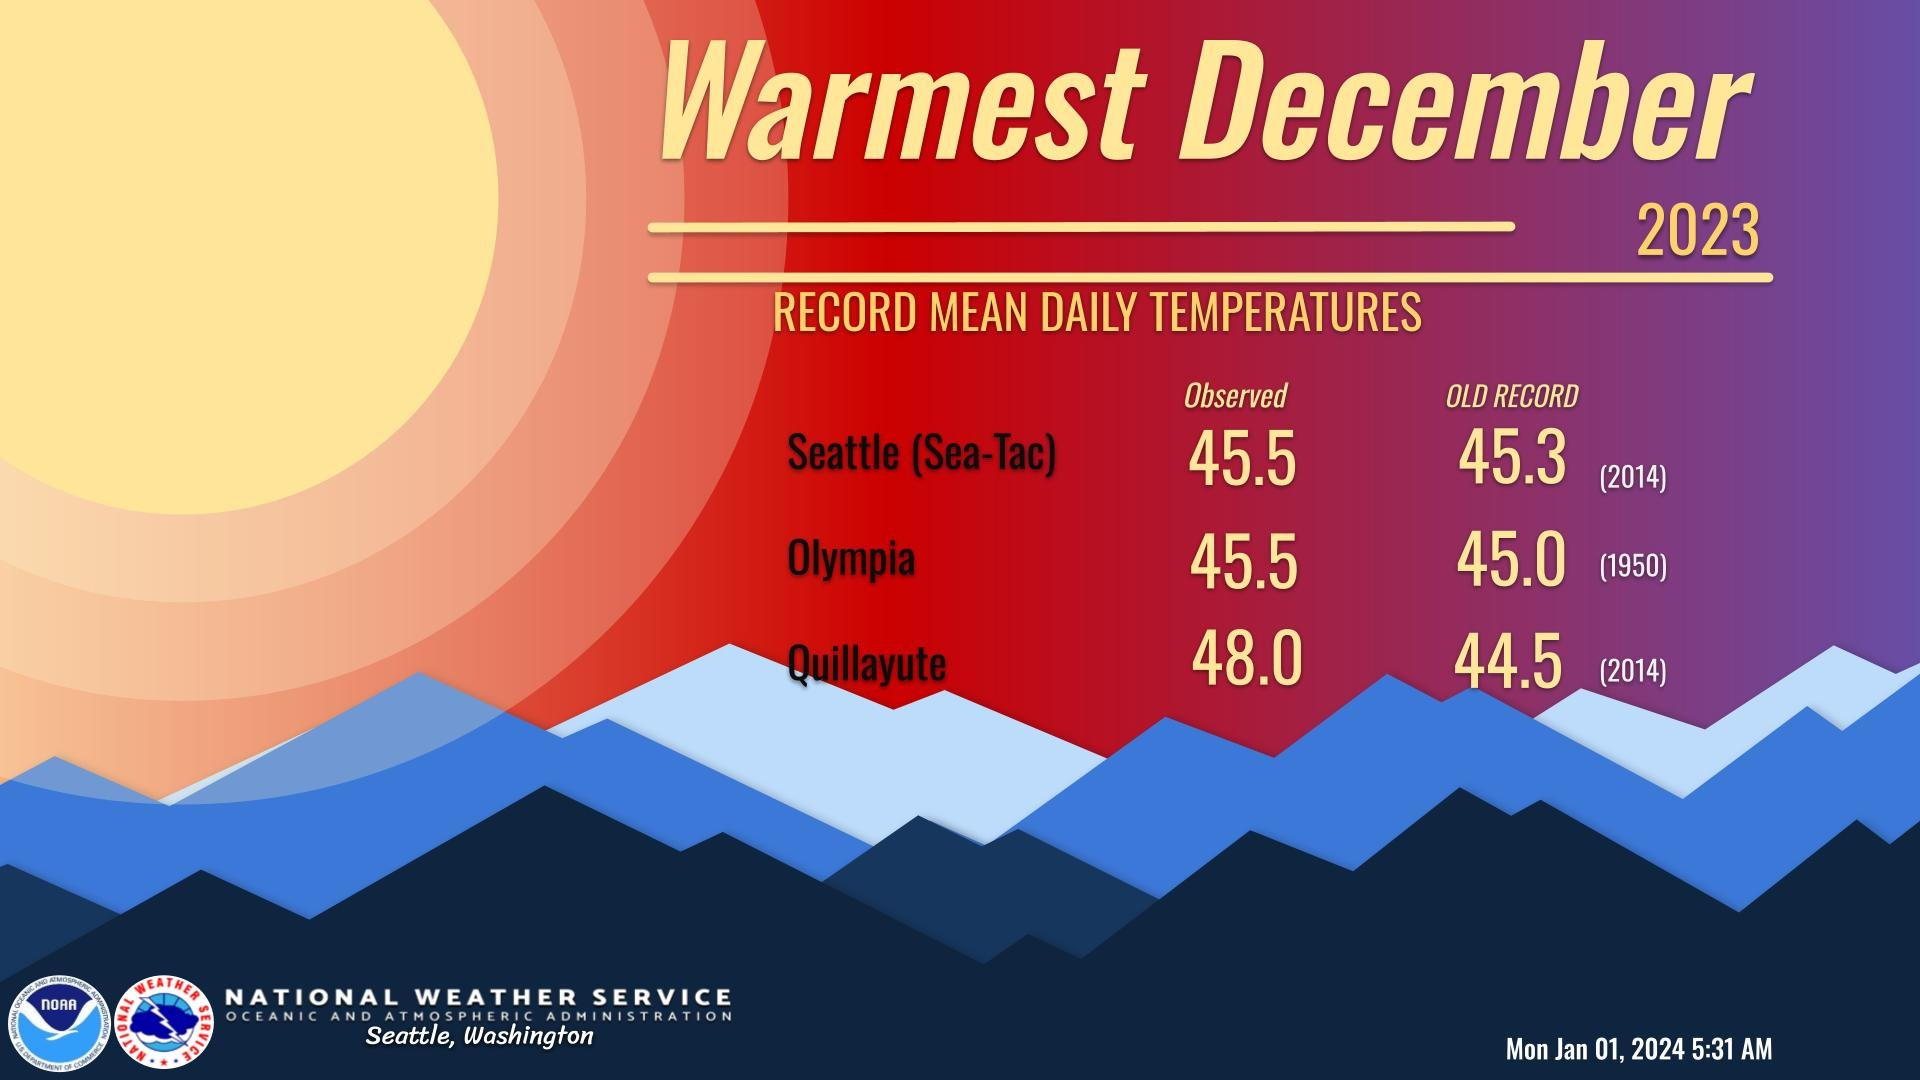 2023 had the warmest December on record for Sea-Tac, Olympia, and Quillayute, with mean daily average temperatures of 45.5°F (7.5°C) in Seattle and Olympia, and 48.0°F (8.9°C) in Quillayute. Graphic: NWS Seattle